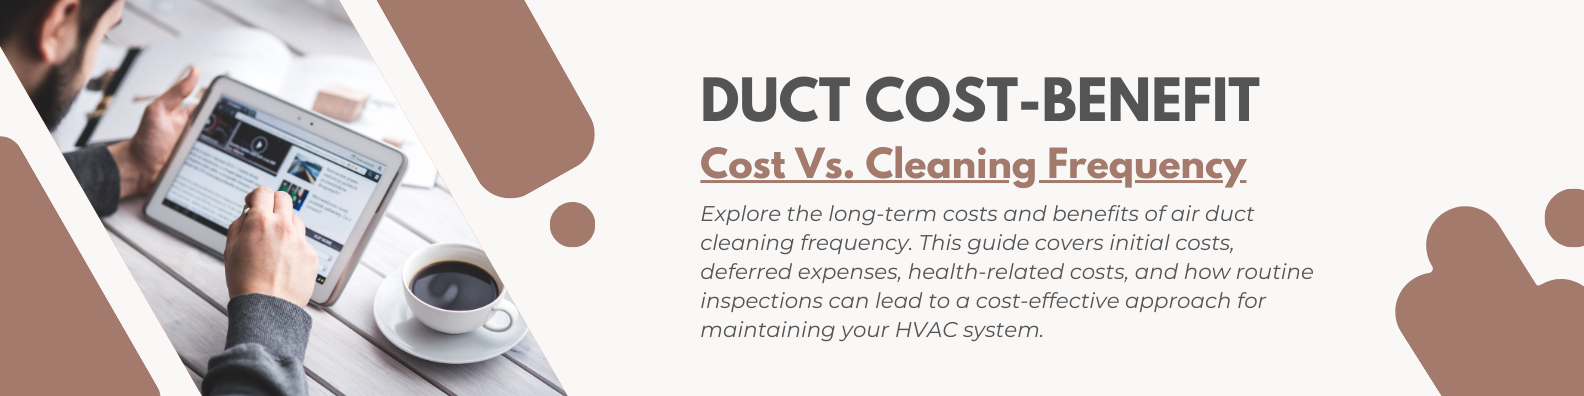 Duct Cost-Benefit